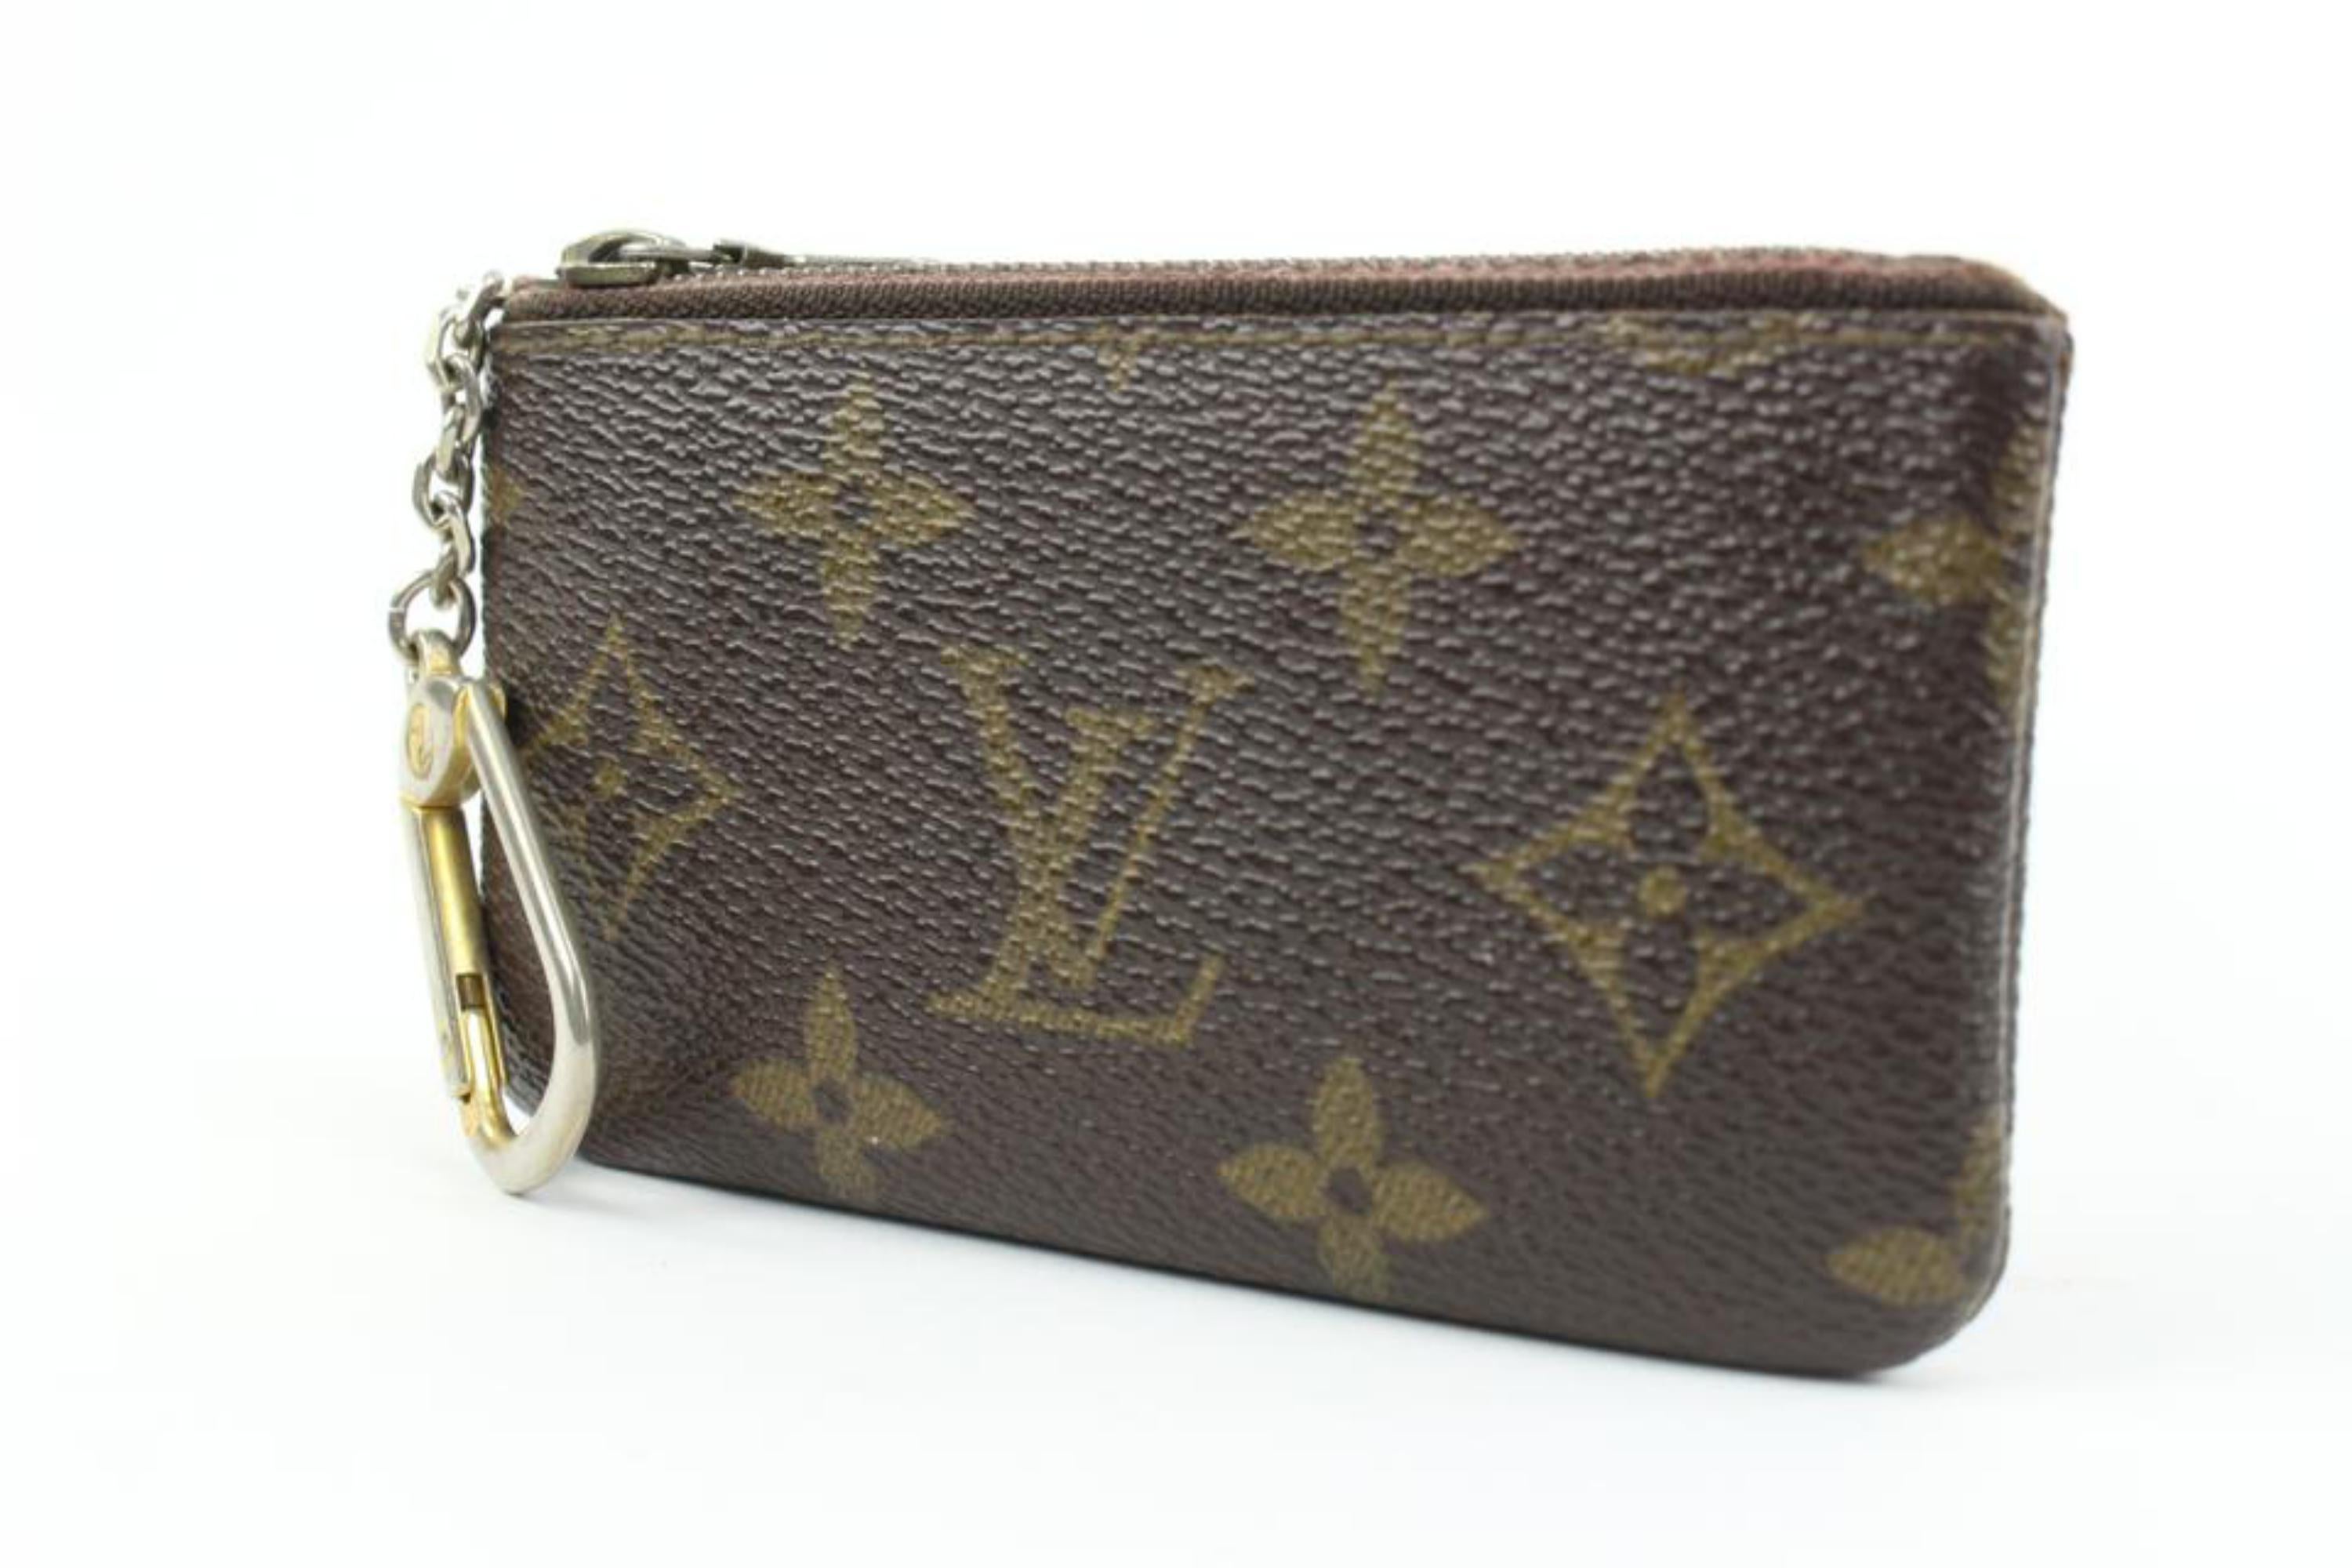 Louis Vuitton Monogram Key Pouch Pochette Cles 71lv32s
Date Code/Serial Number: 854
Made In: France
Measurements: Length:  4.5